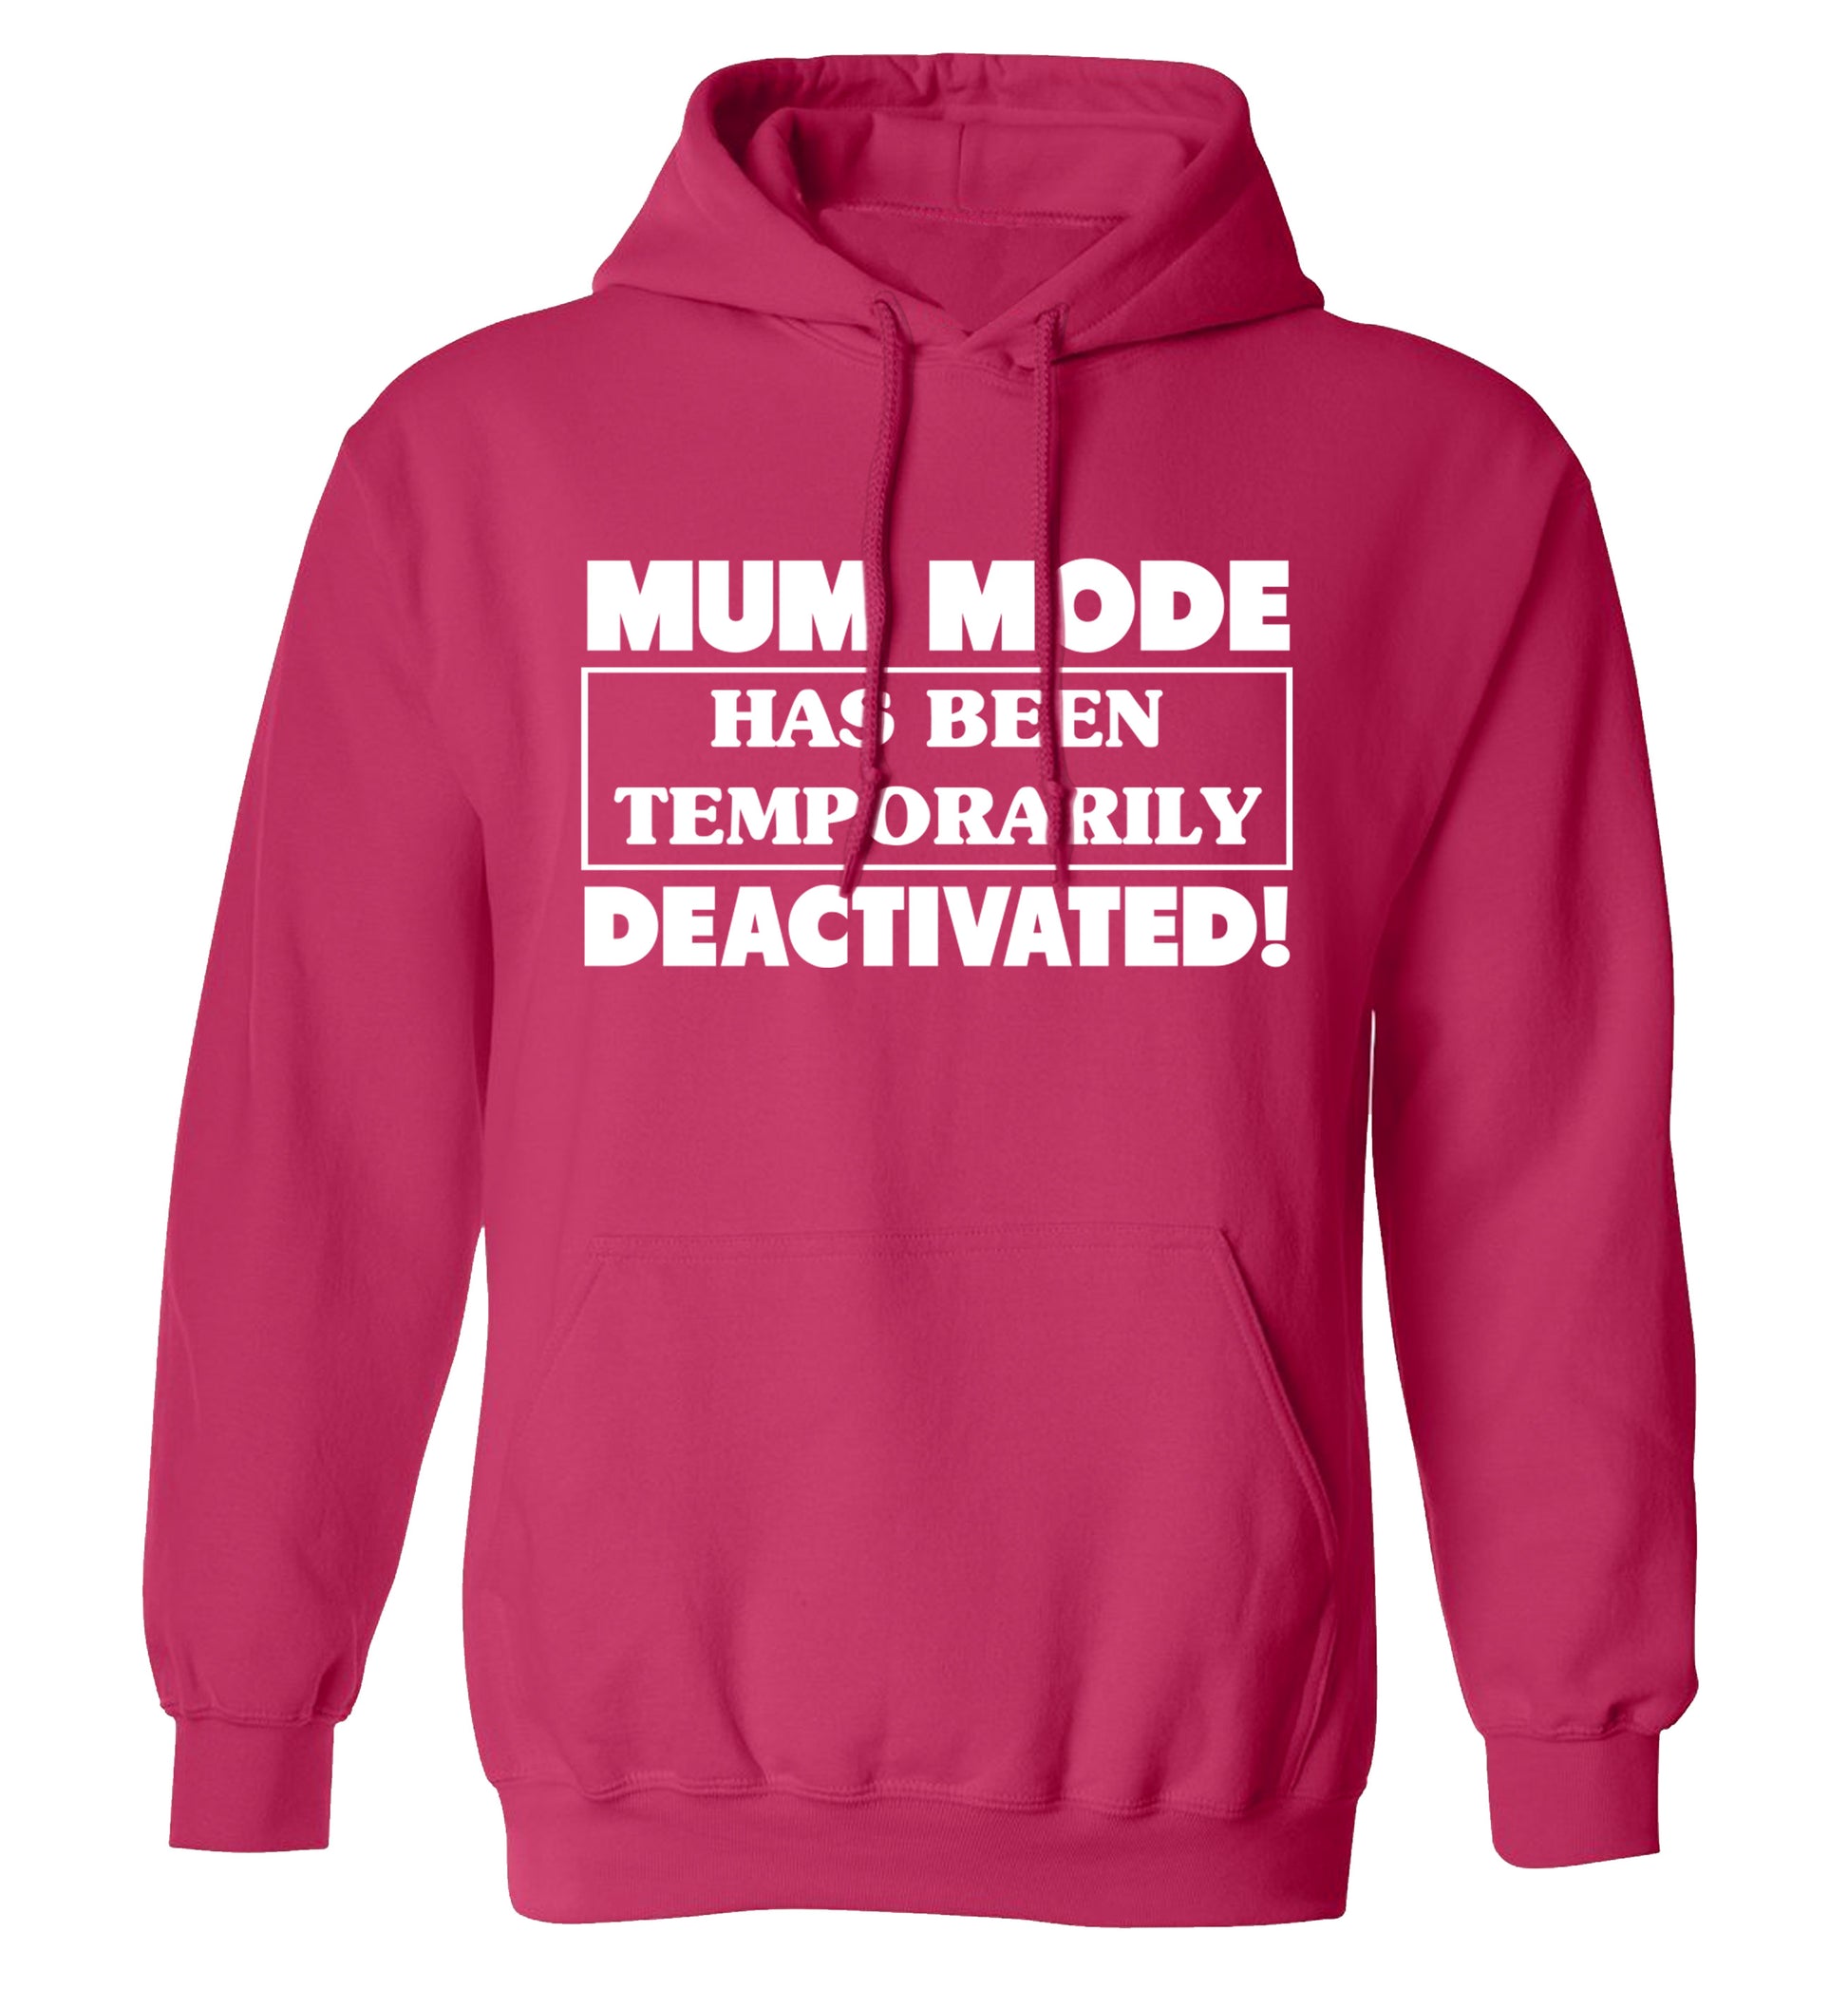 Mum mode has been temporarily deactivated! adults unisex pink hoodie 2XL